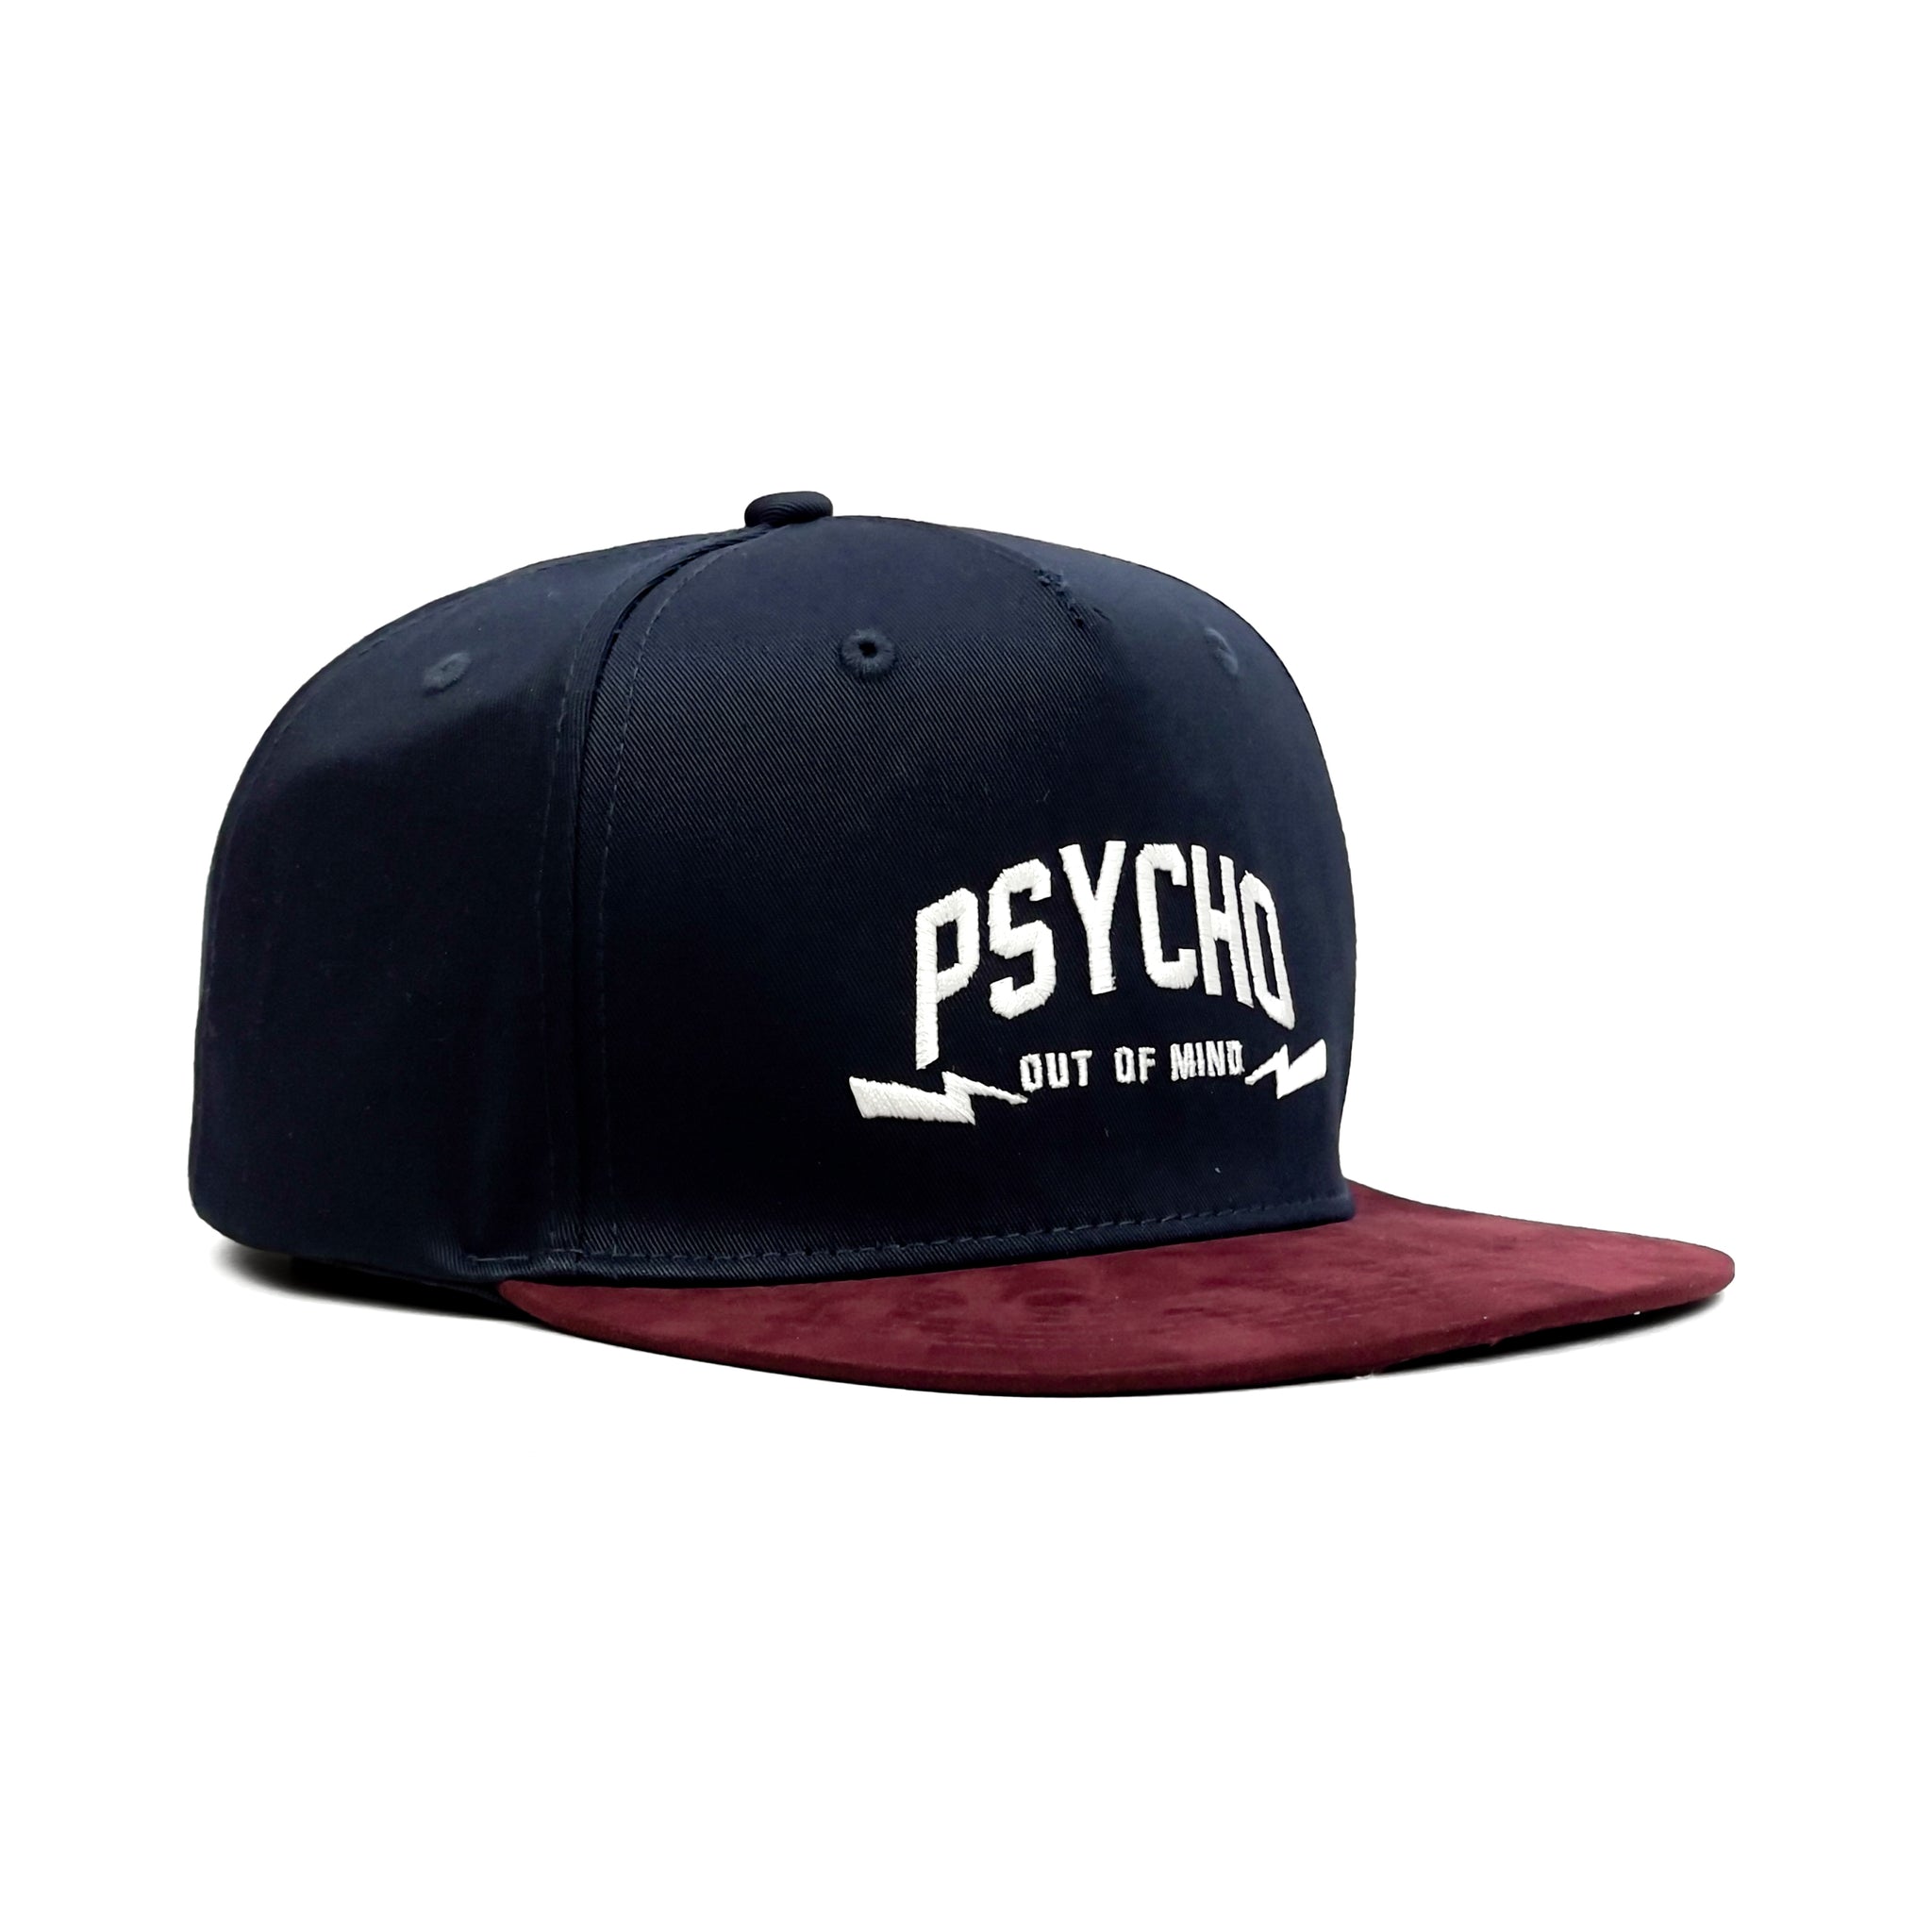 HEAD GEAR PSYCHO OUT OF THE MIND FLAT CAP